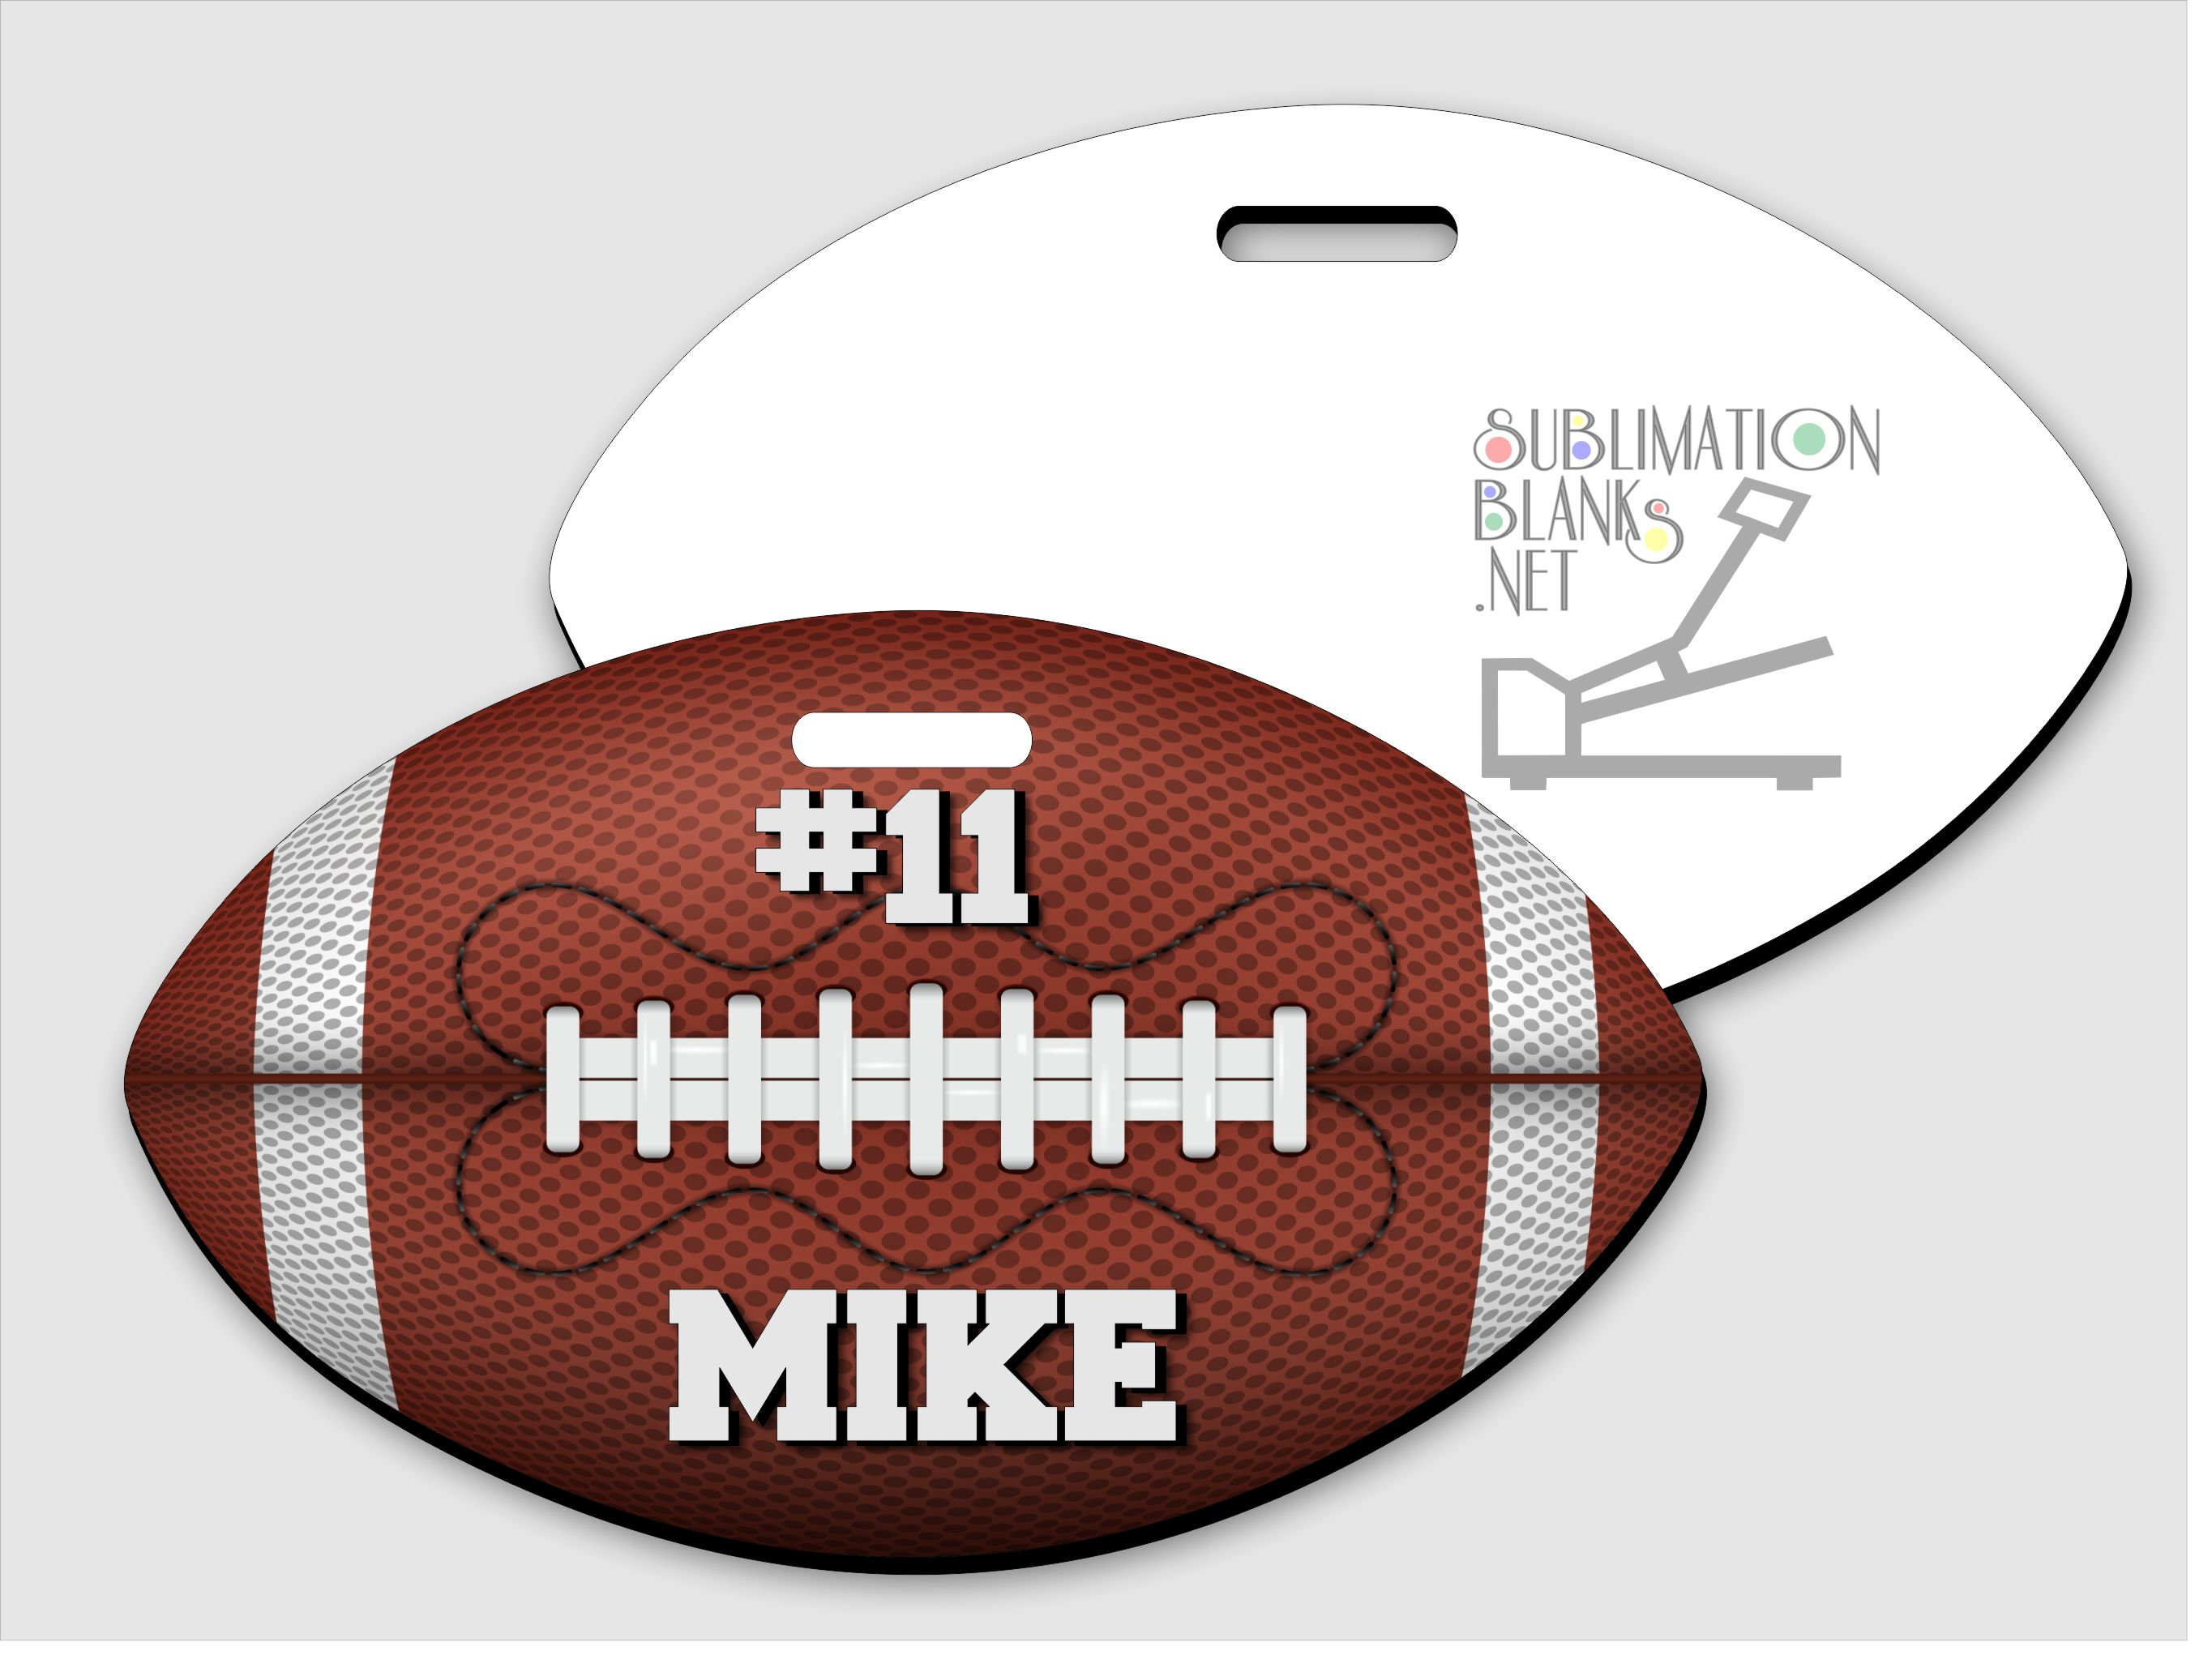 Sublimation, CIRCLE BLANKS, 3. Diameter, Double Sided White, Aluminum / Dye  Sub Blanks, Rounds, Ornaments 50 Pieces 